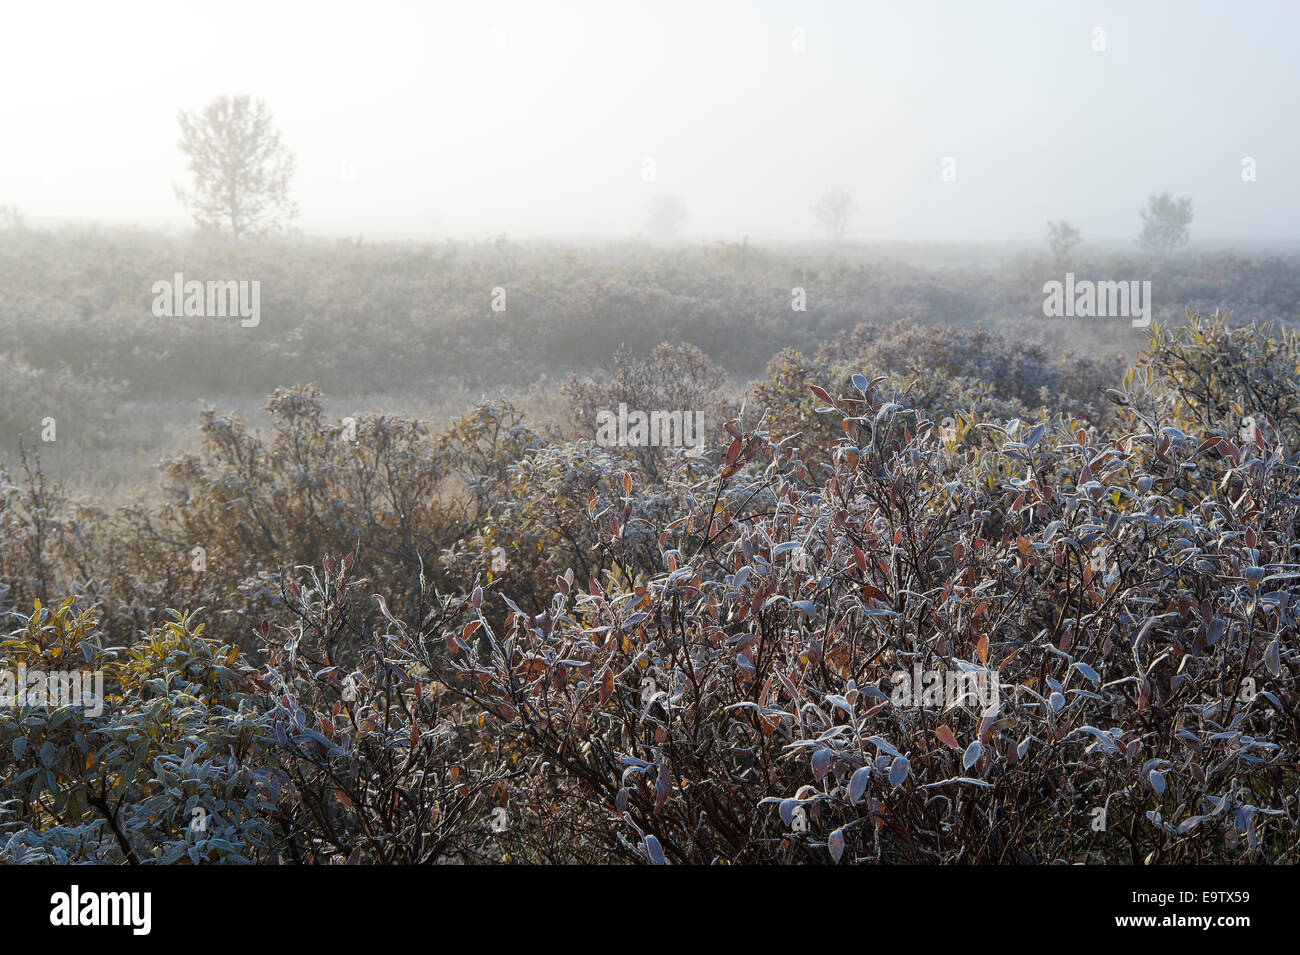 Willow bushes at misty morning Stock Photo